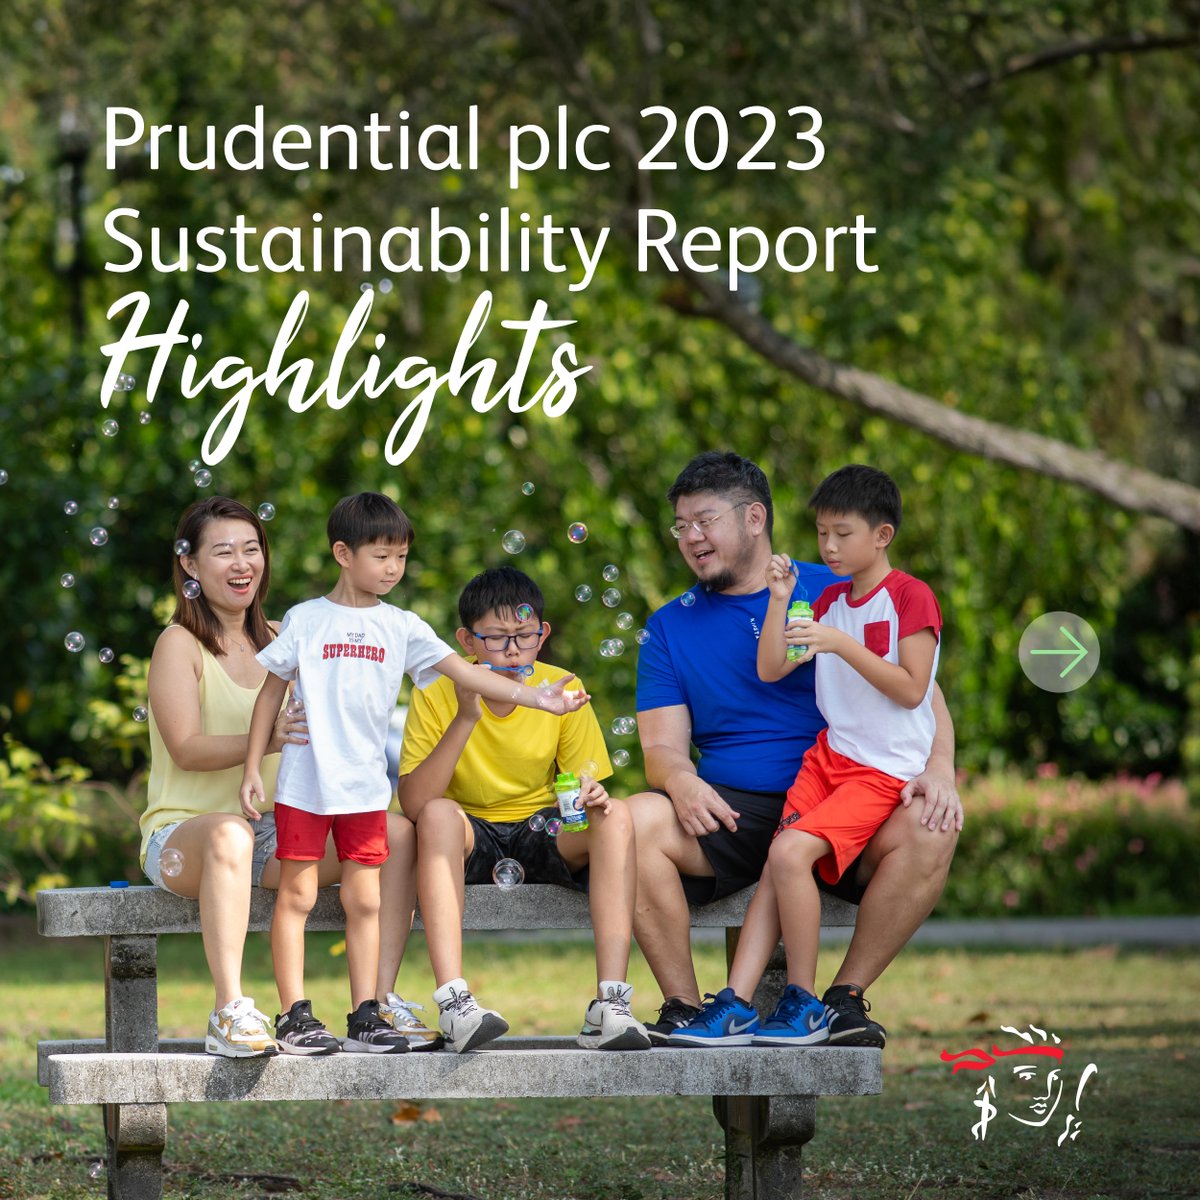 We have published our 2023 Sustainability Report. It outlines our ongoing commitment to deliver real-world impact and long-term resilience in the markets in which we operate. Read the full report here: spr.ly/6012ZpSmE #NextPrudential #EveryLifeEveryFuture